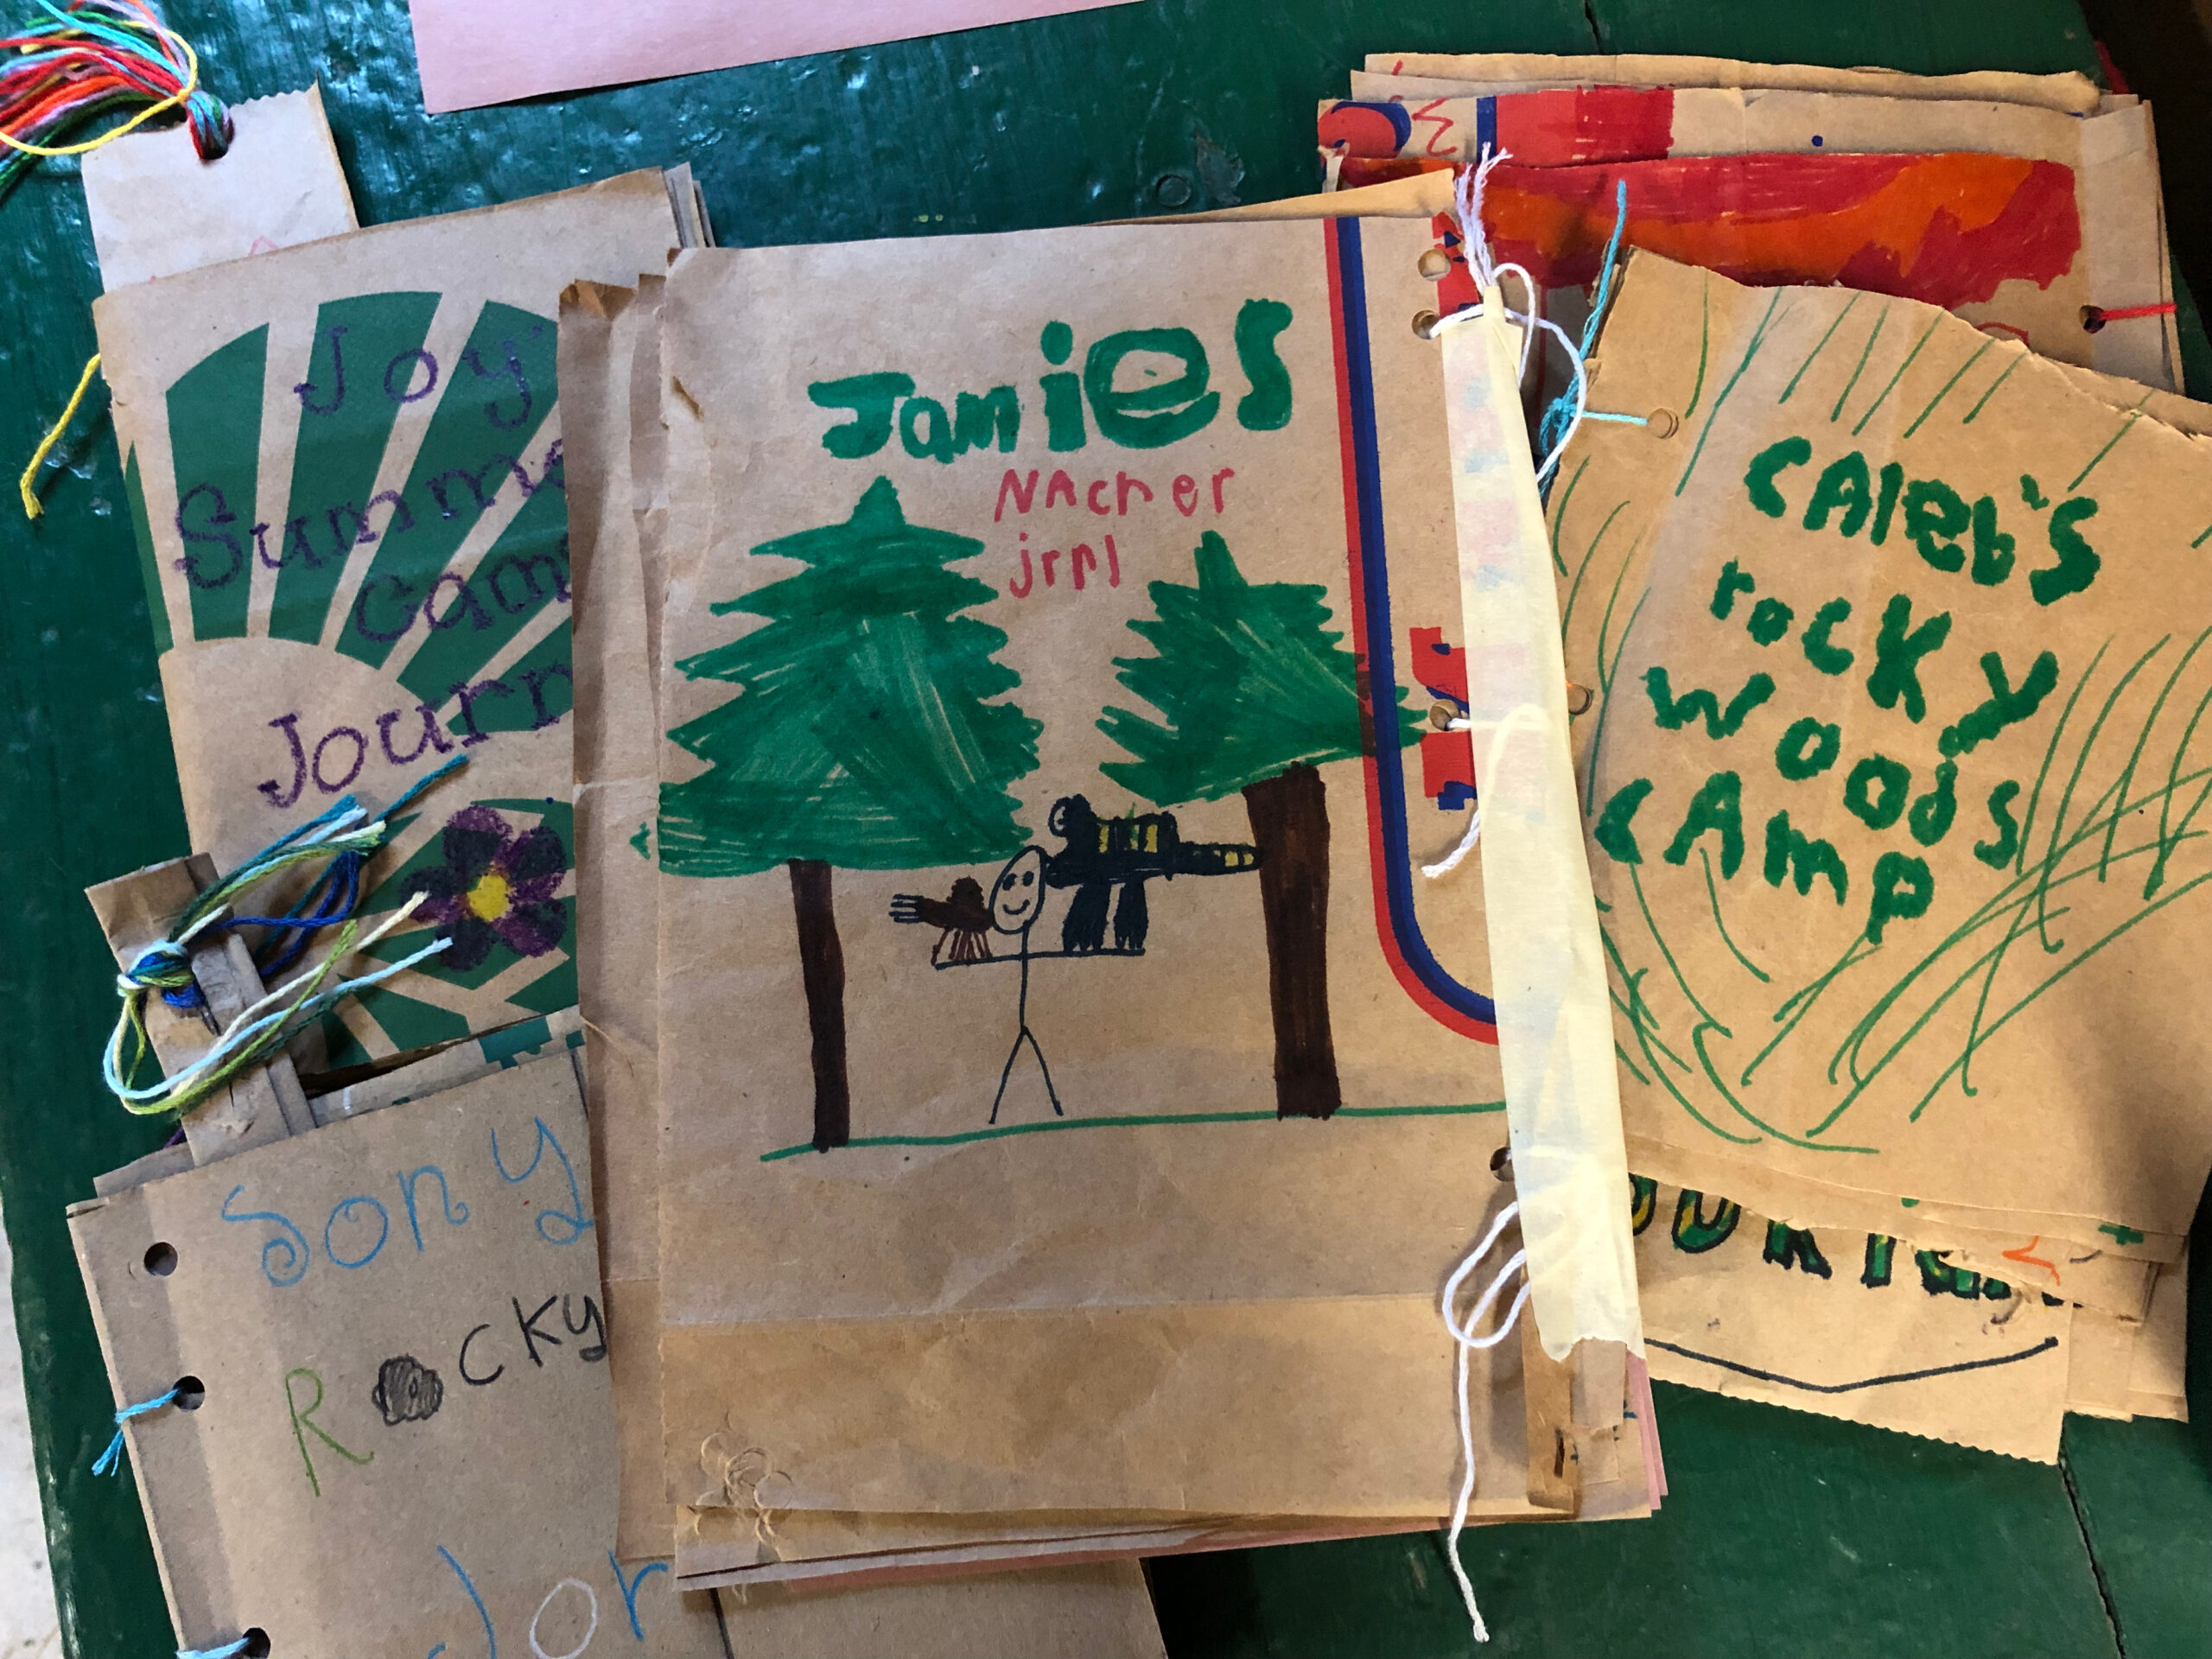 Booklets made by campers featuring trees and hand-drawn animals